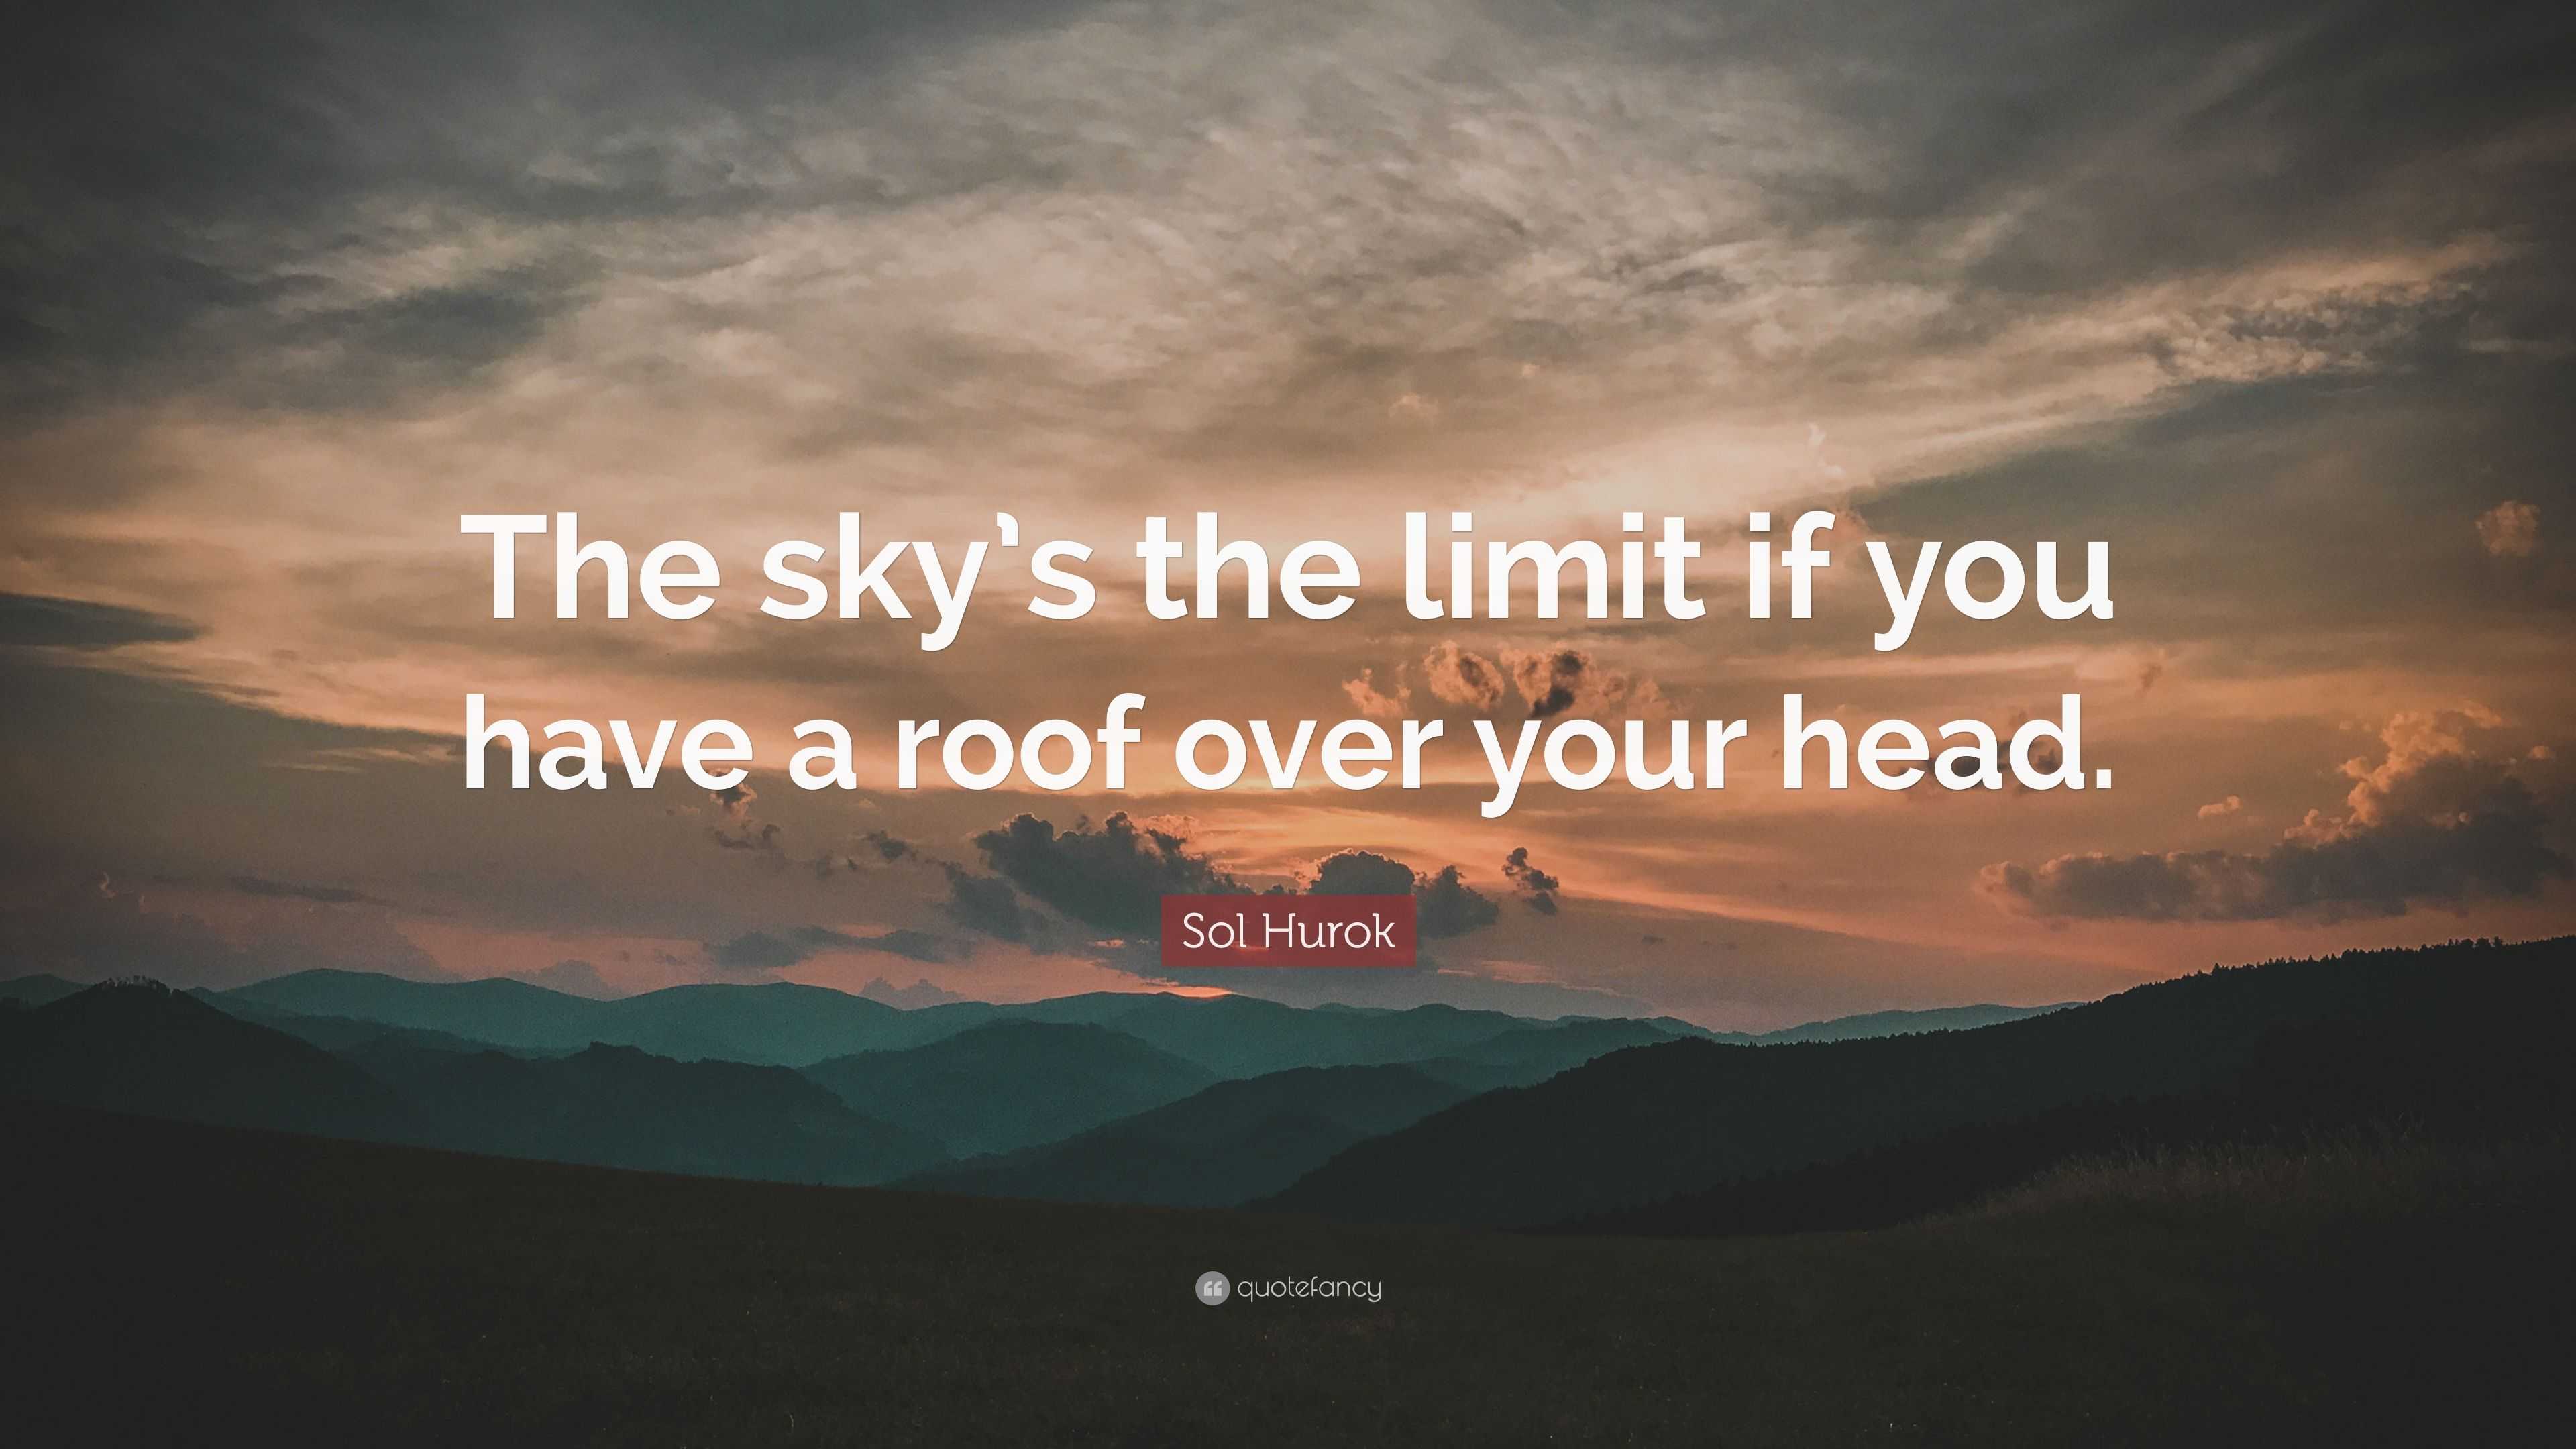 4852852 Sol Hurok Quote The sky s the limit if you have a roof over your